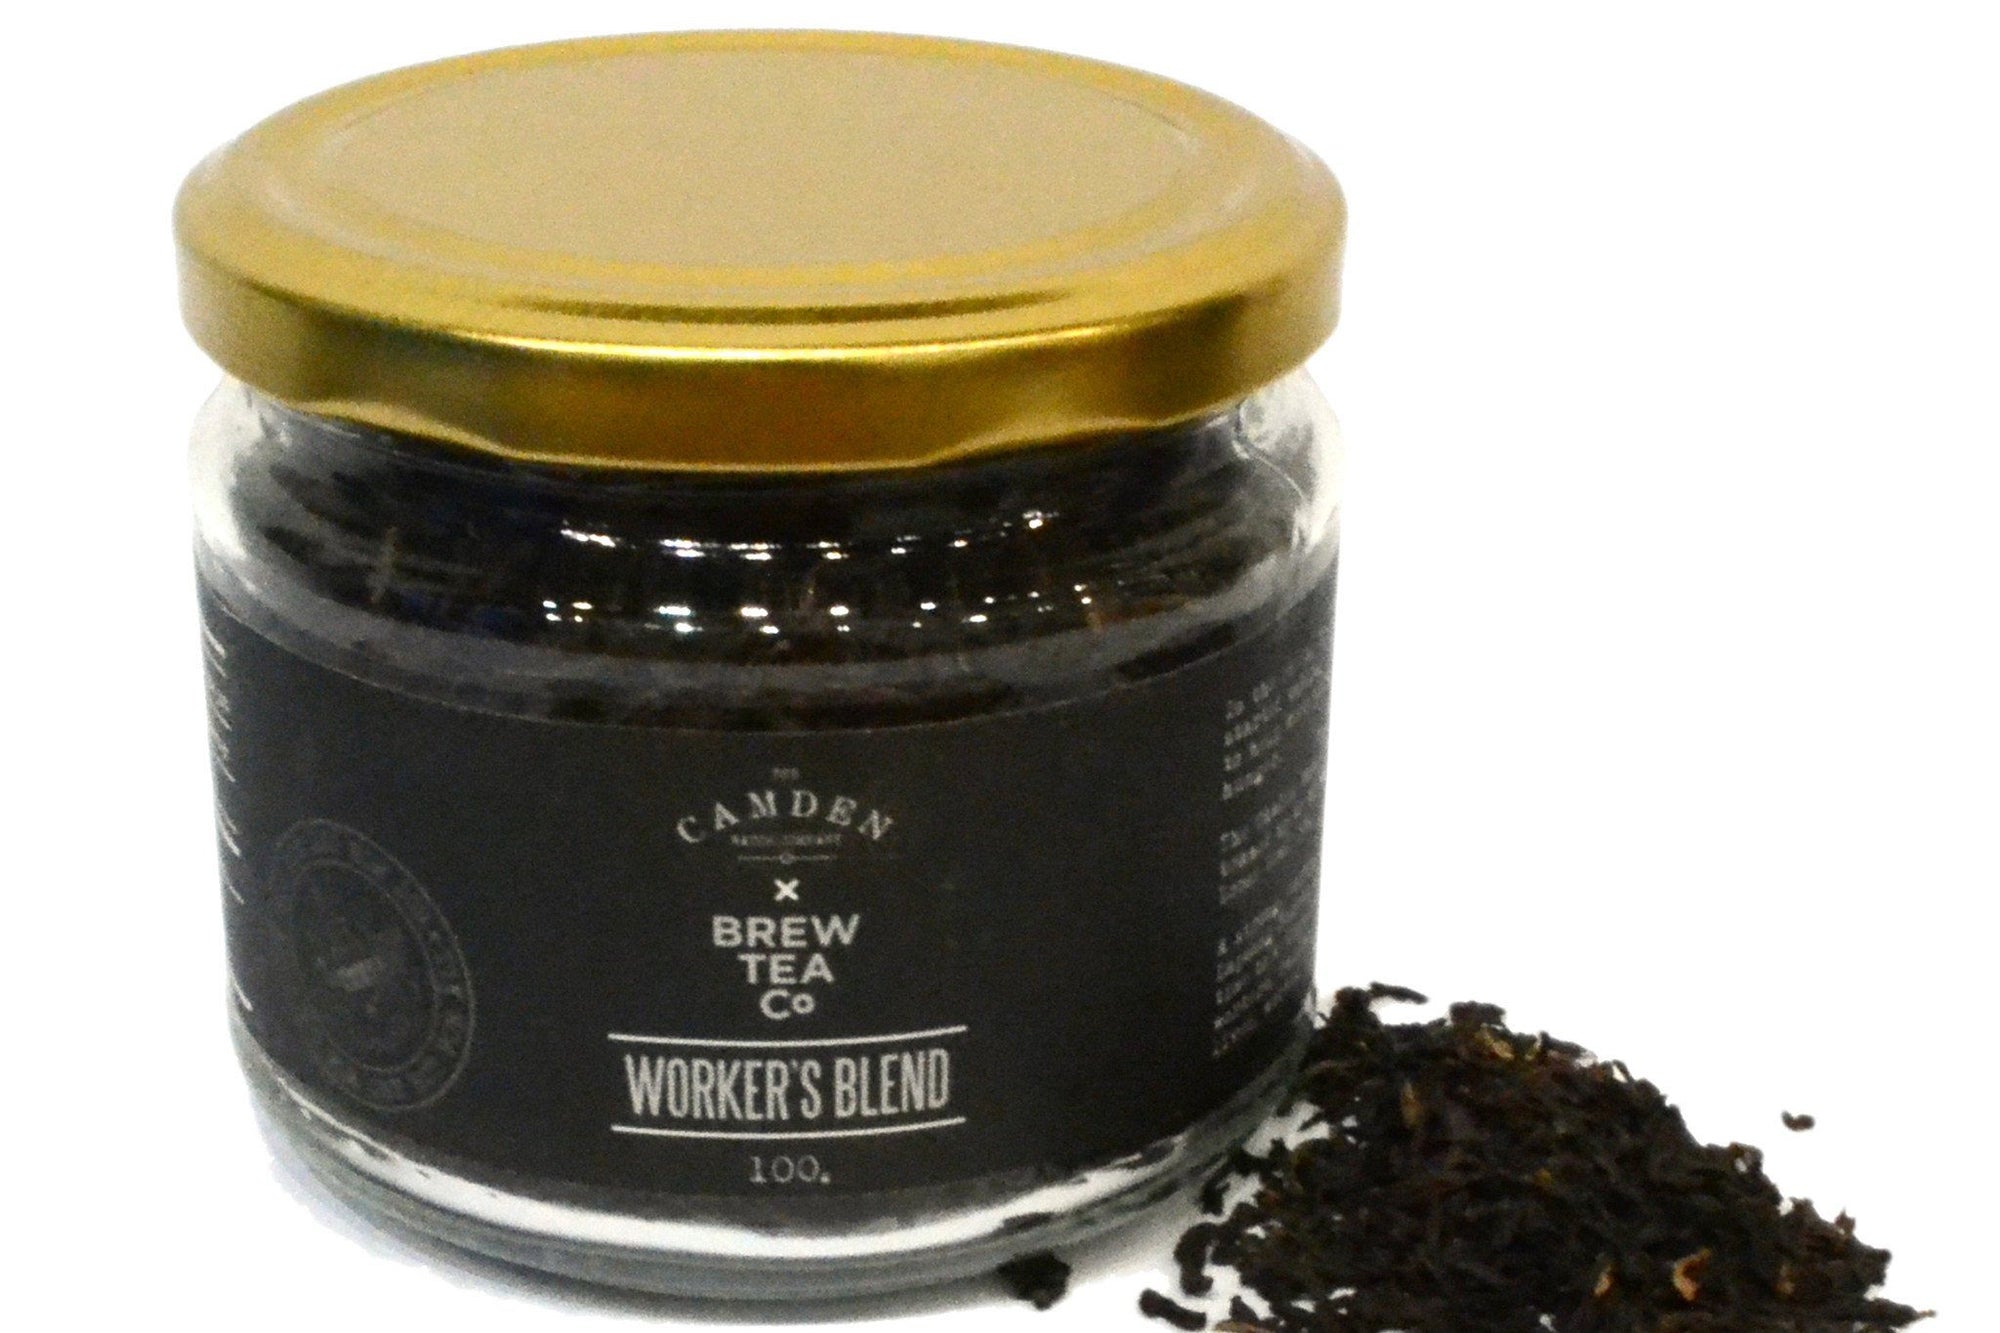 Fancy a Cuppa? Introducing our Worker's Blend Tea